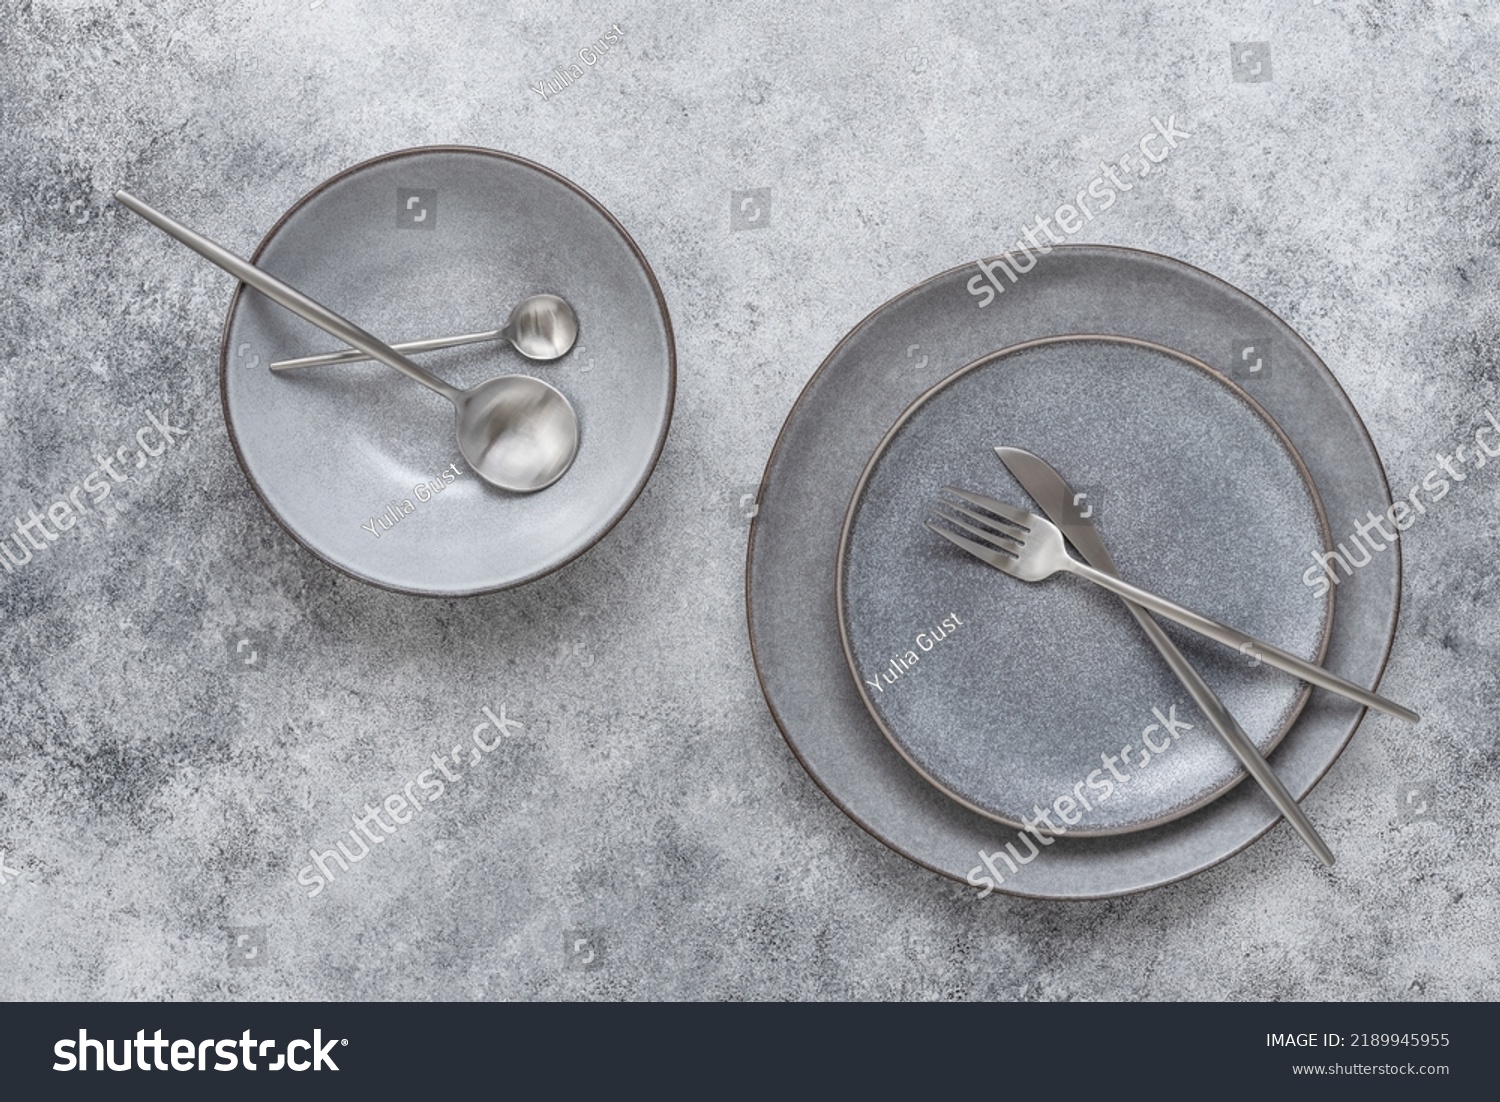 Gray ceramic plates and cutlery on a gray stone background. Modern craft crockery for table setting. Top view. #2189945955